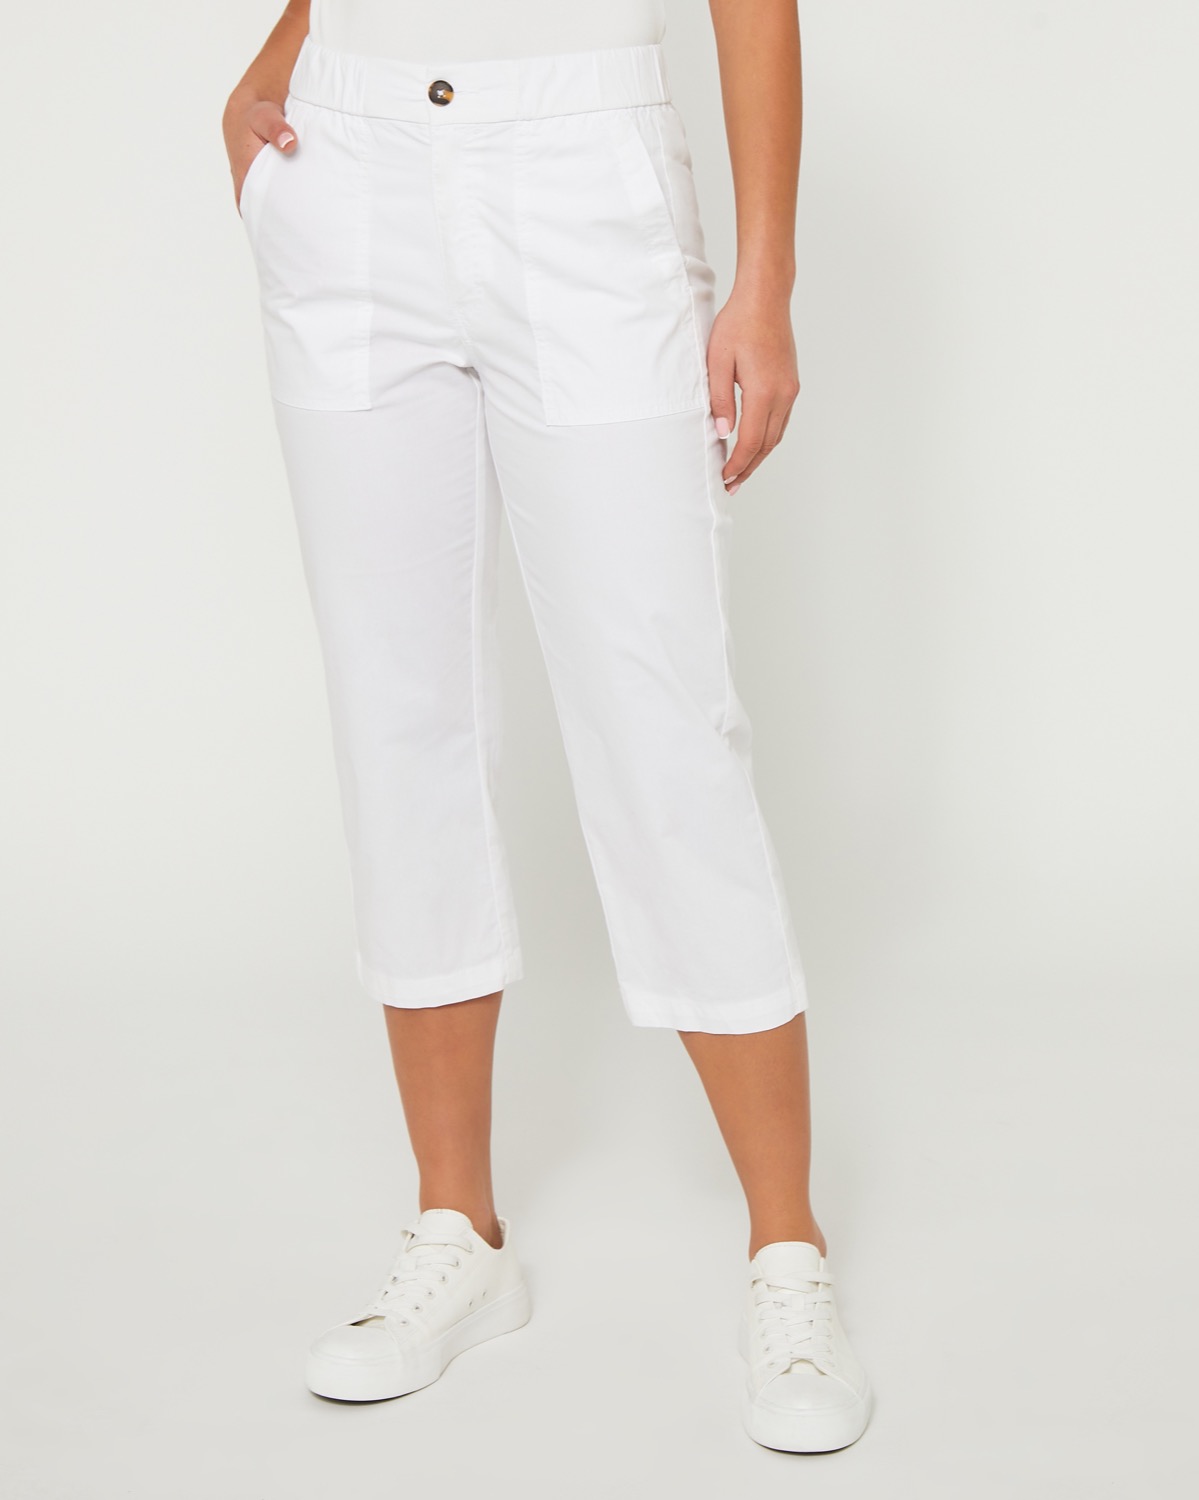 G by Giuliana Retro Slim Crop Pant with Hide-and-Chic Waistband - 20187229  | HSN